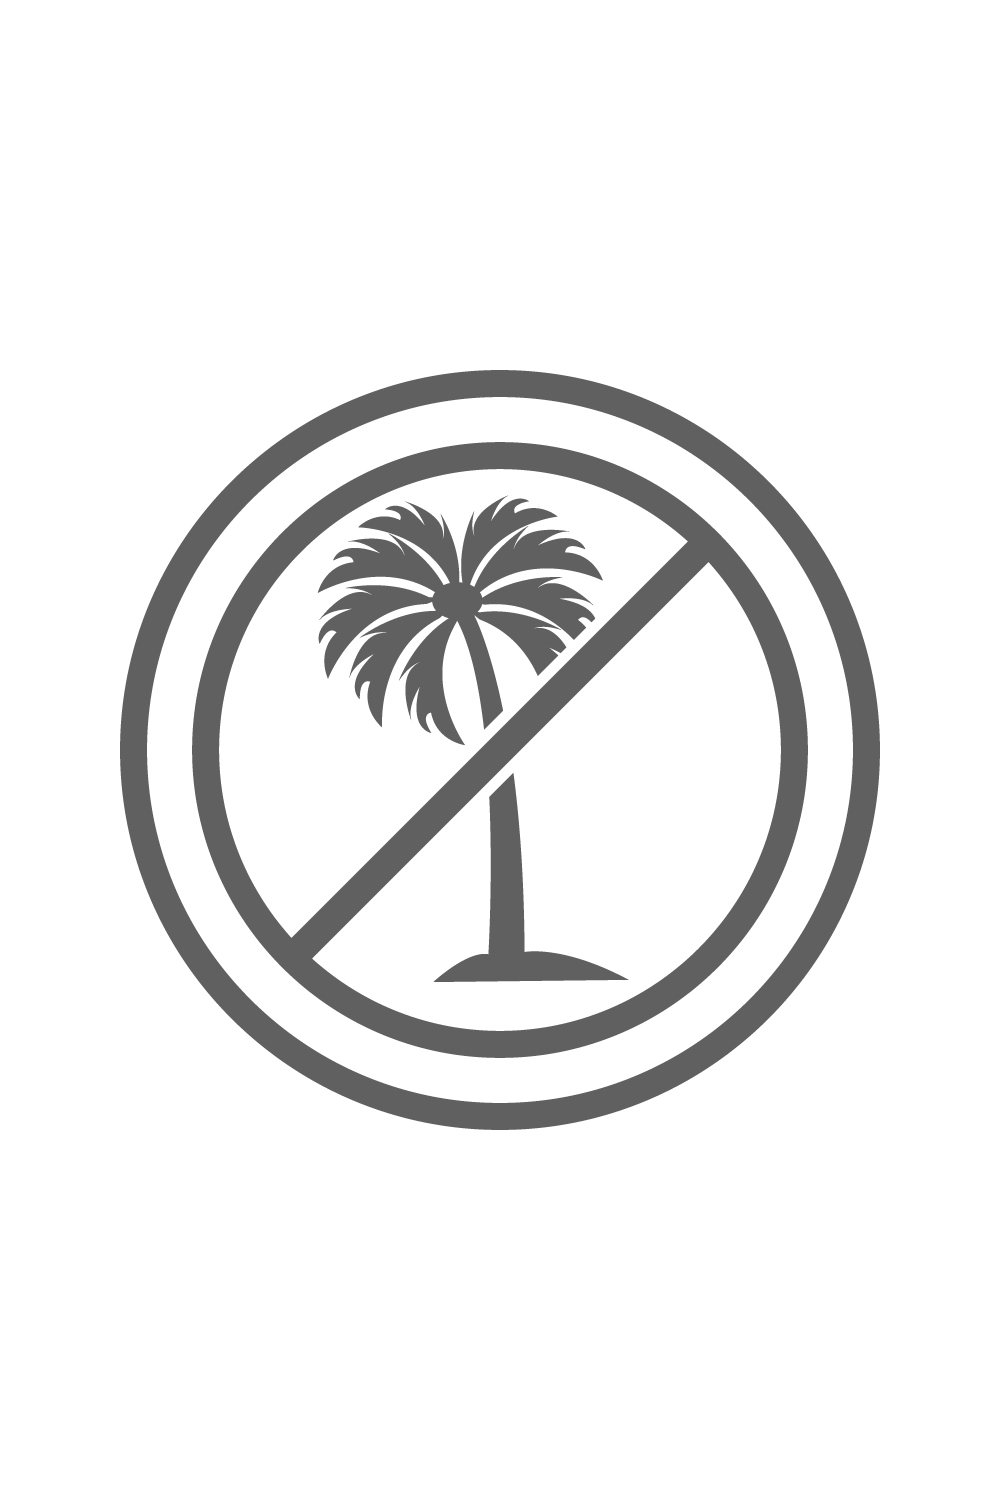 Palm Tree logo design vector images Coconut tree free logo design Premium vector illustration Palm Tree free icon pinterest preview image.